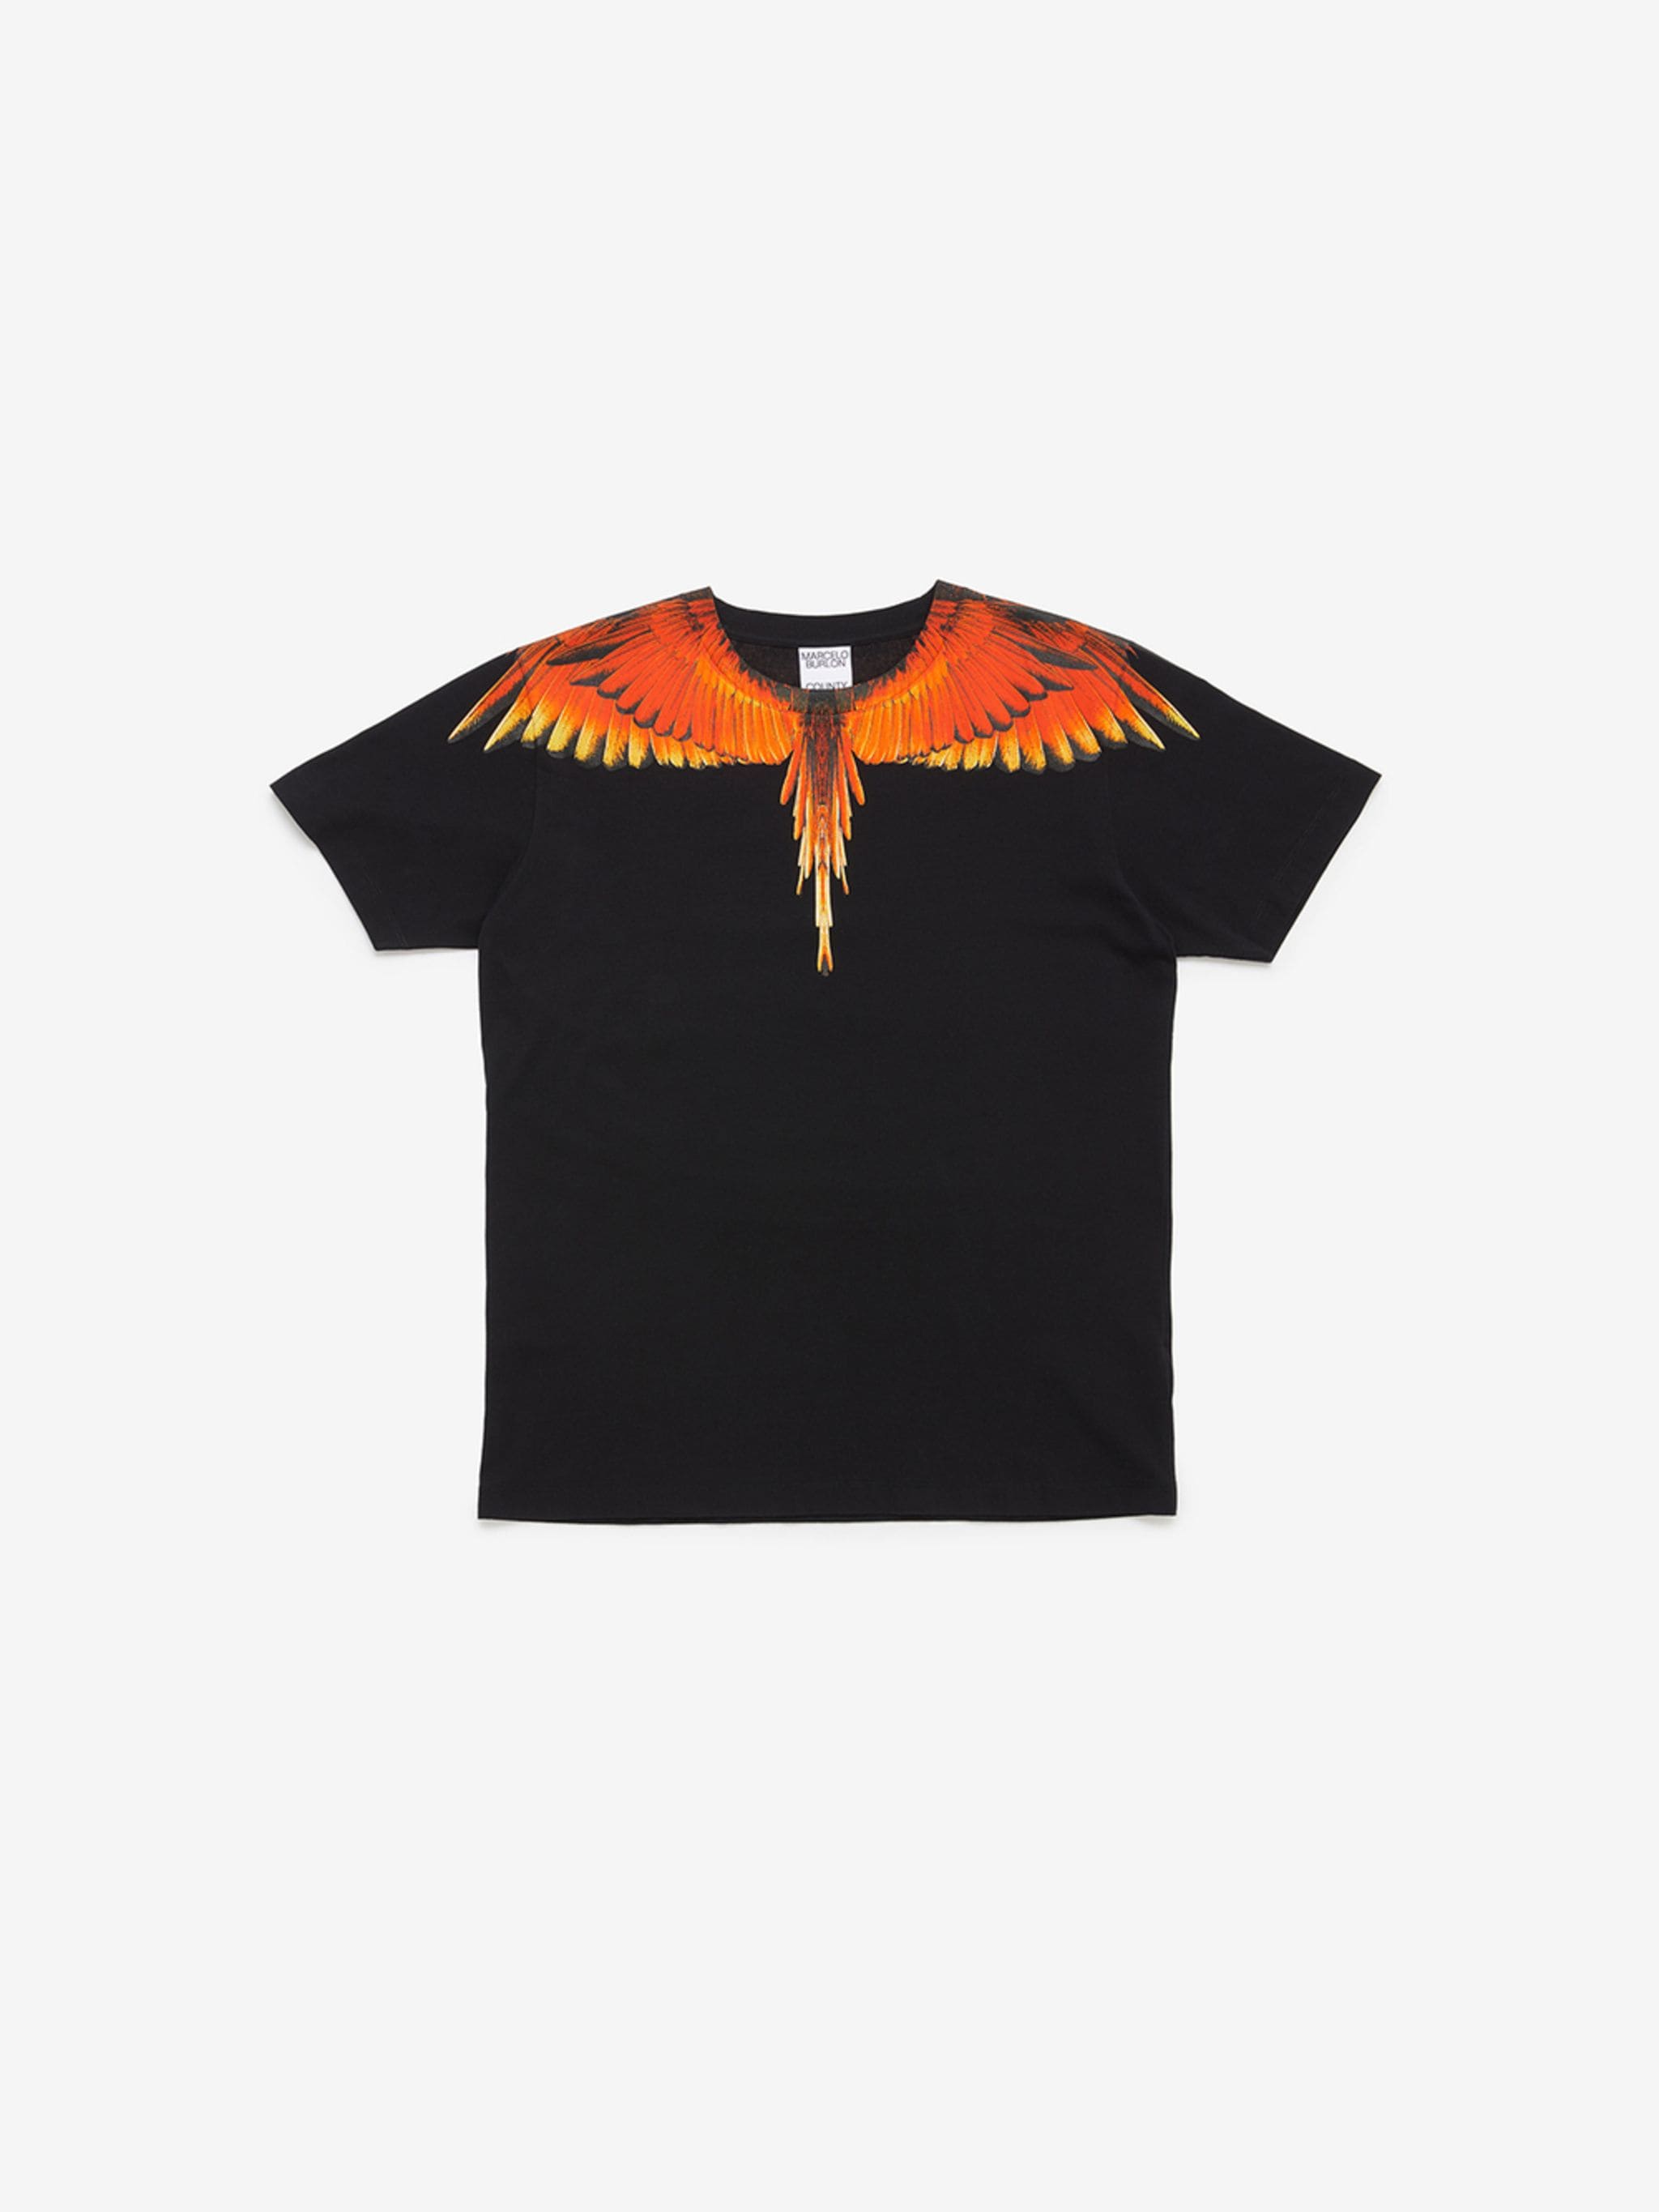 Wings print cotton T-shirt from Marcelo Burlon County of Milan featuring black, cotton, signature Marcelo Burlon Wings print, round neck and short sleeves.